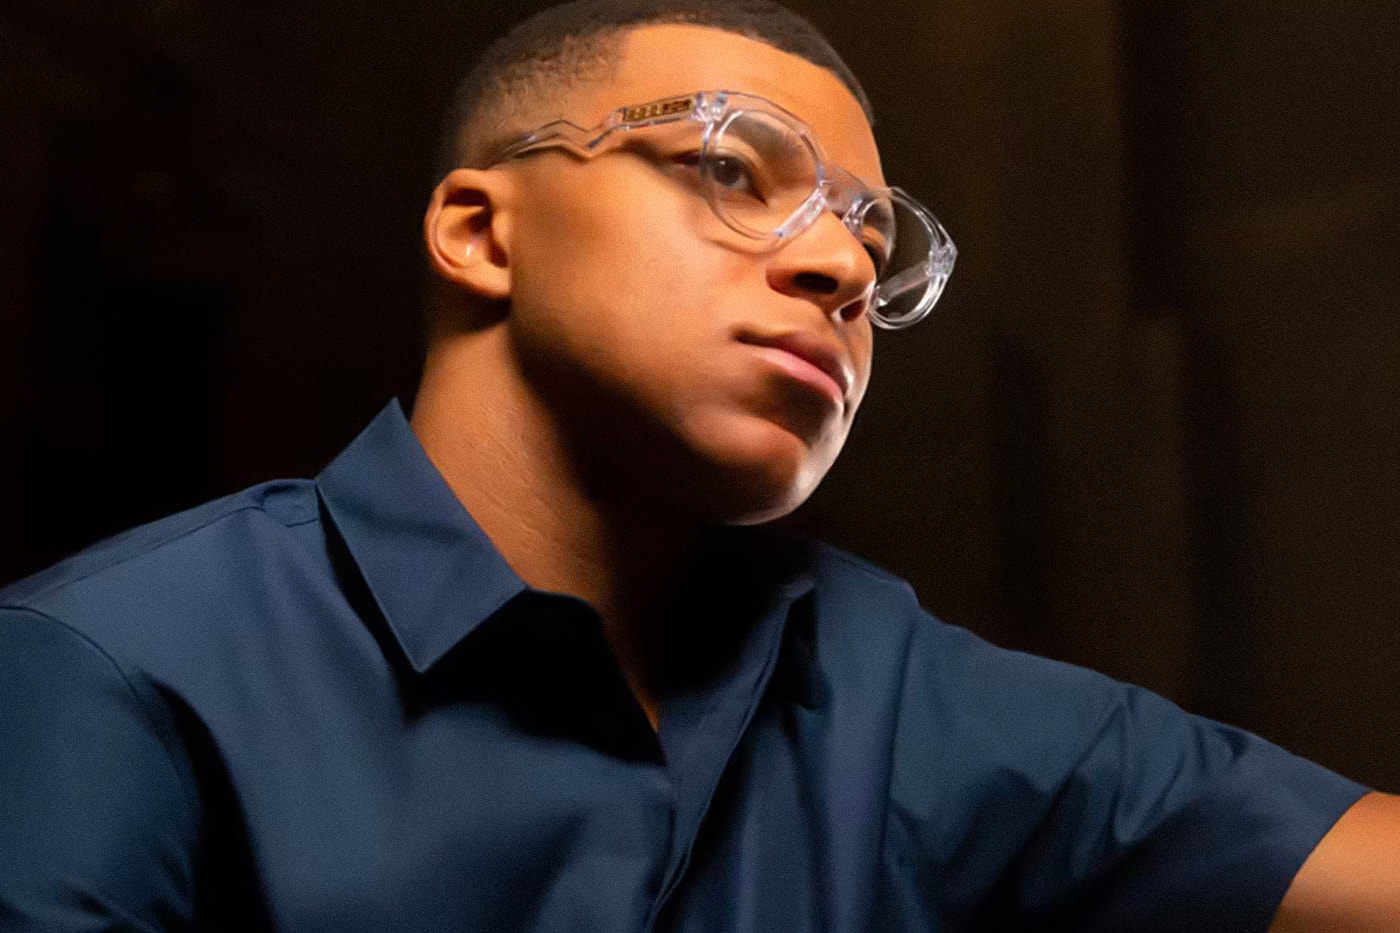 Oakley Taps Kylian Mbappé for Football-Infused "Signature Series" Eyewear